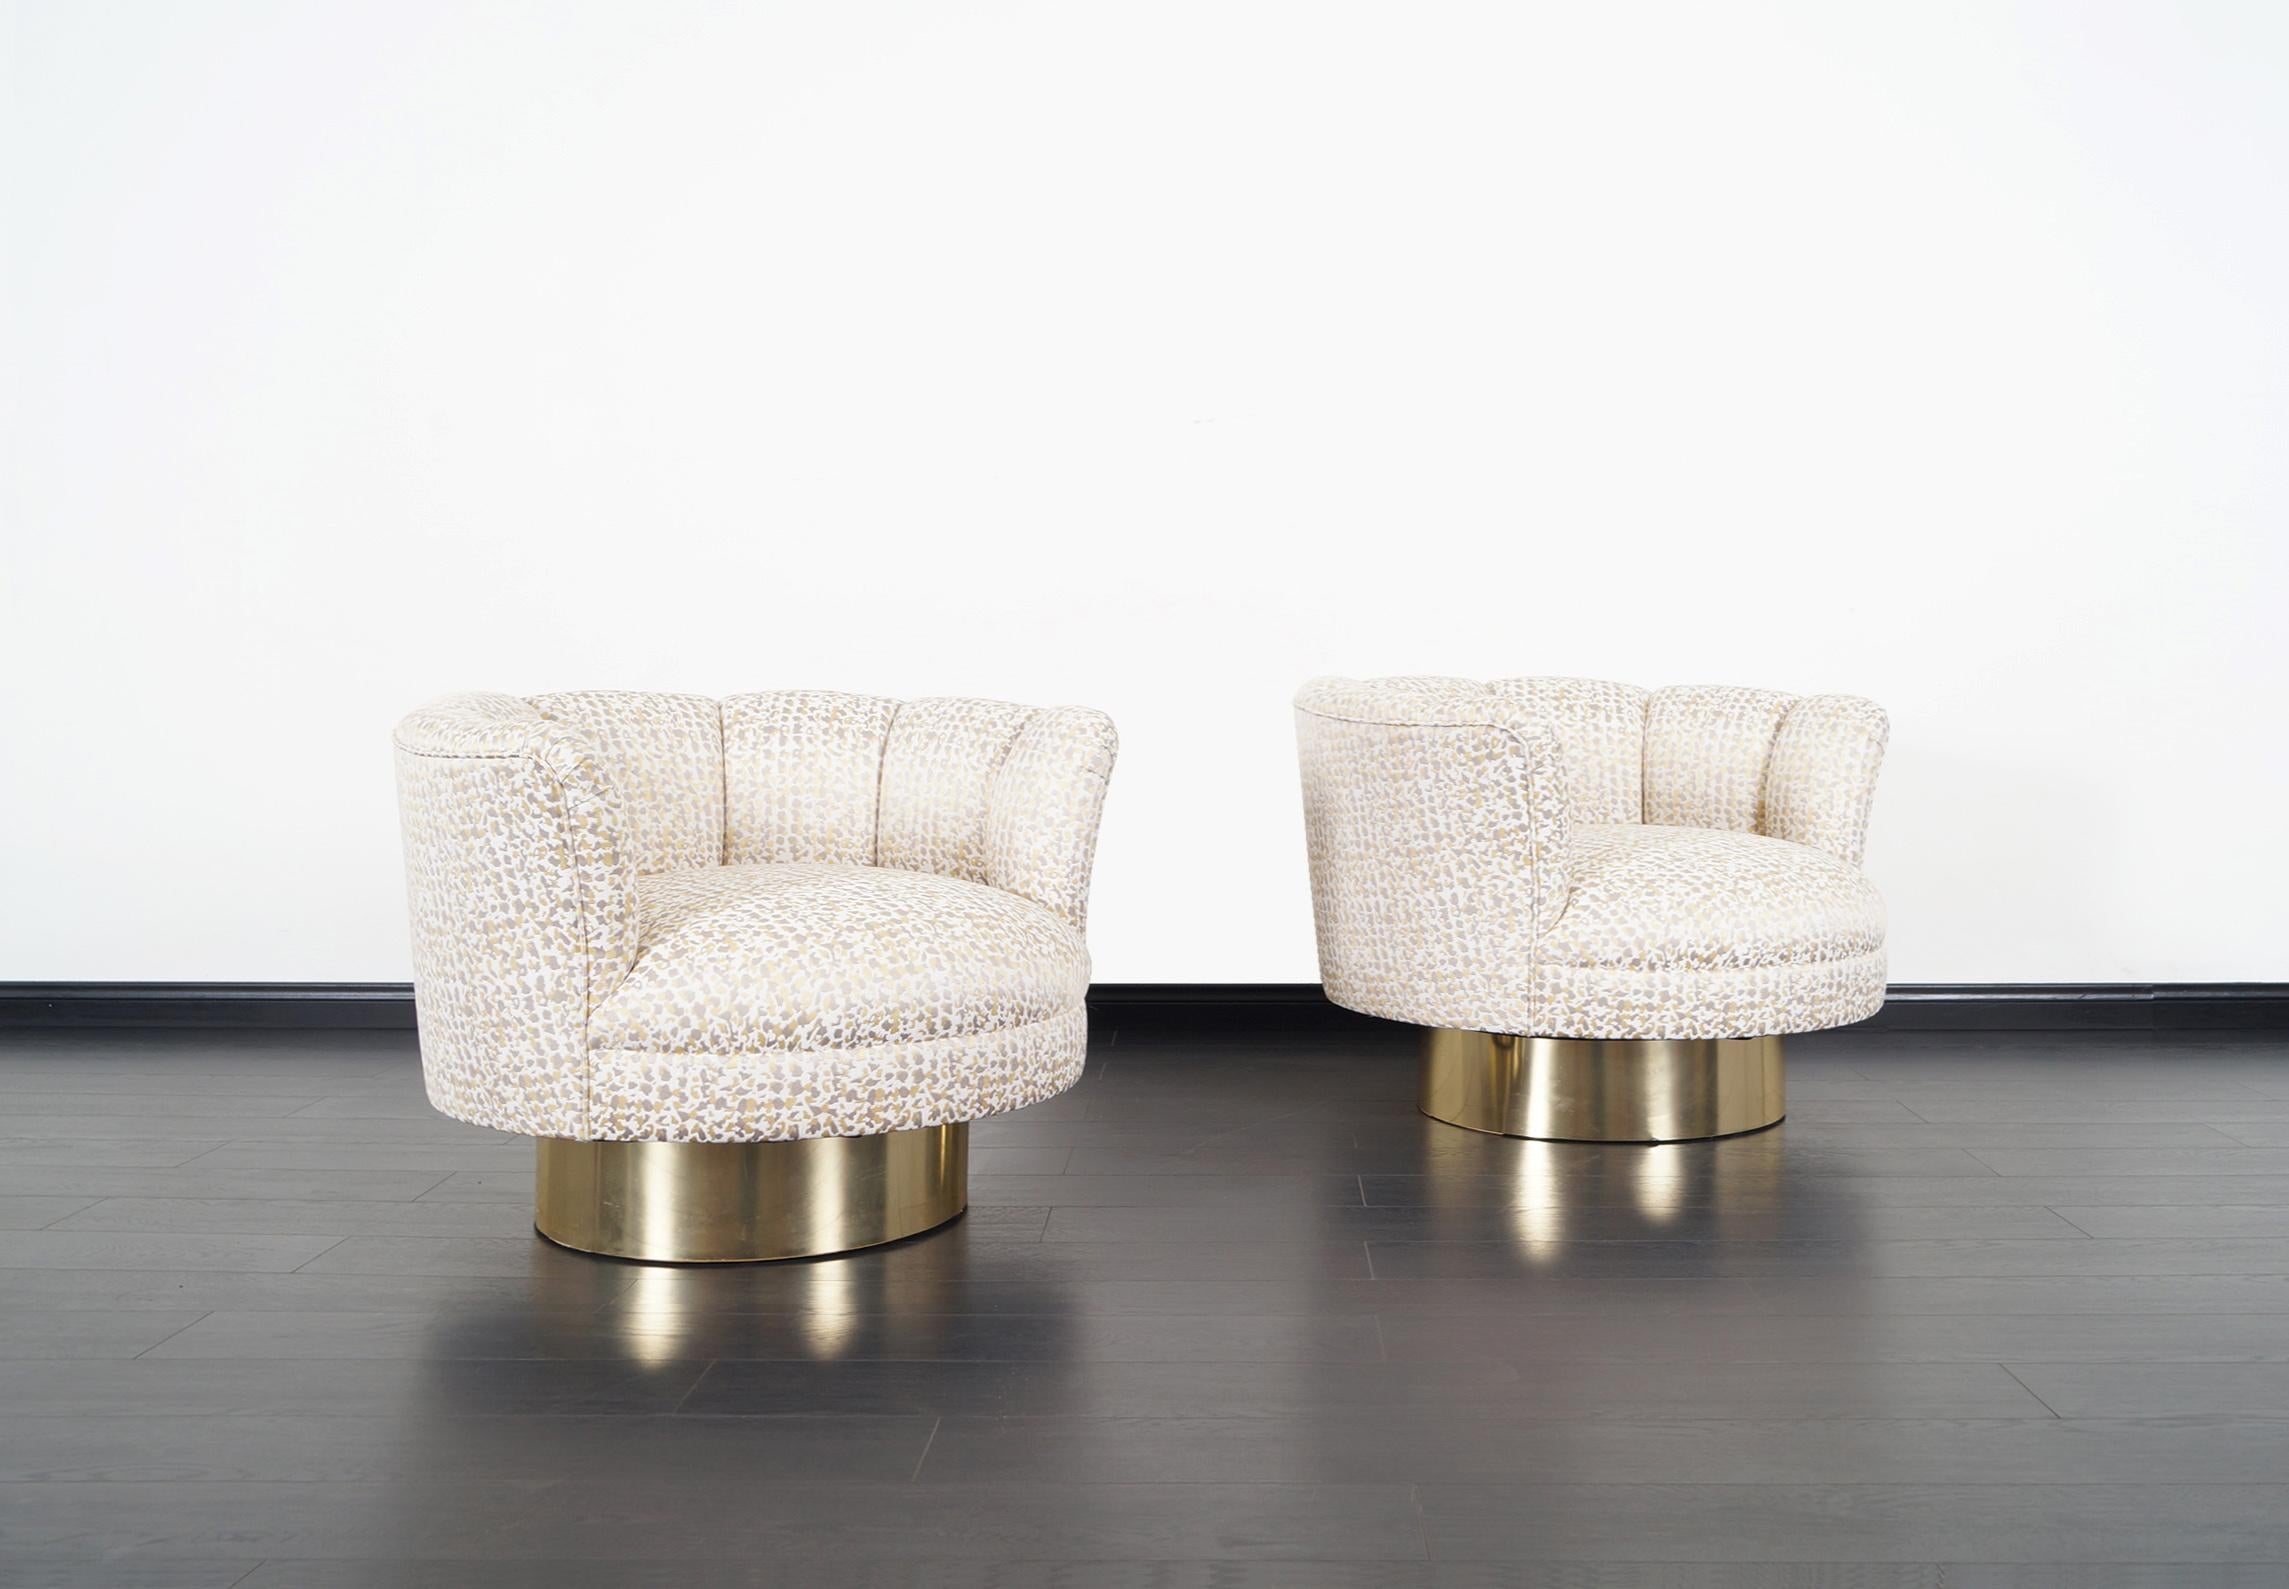 An exceptional pair of vintage swivel lounge chairs designed by Milo Baughman. Each chair has a circular brass base that swivel with ease. The chairs are newly reupholstered in custom fabric.